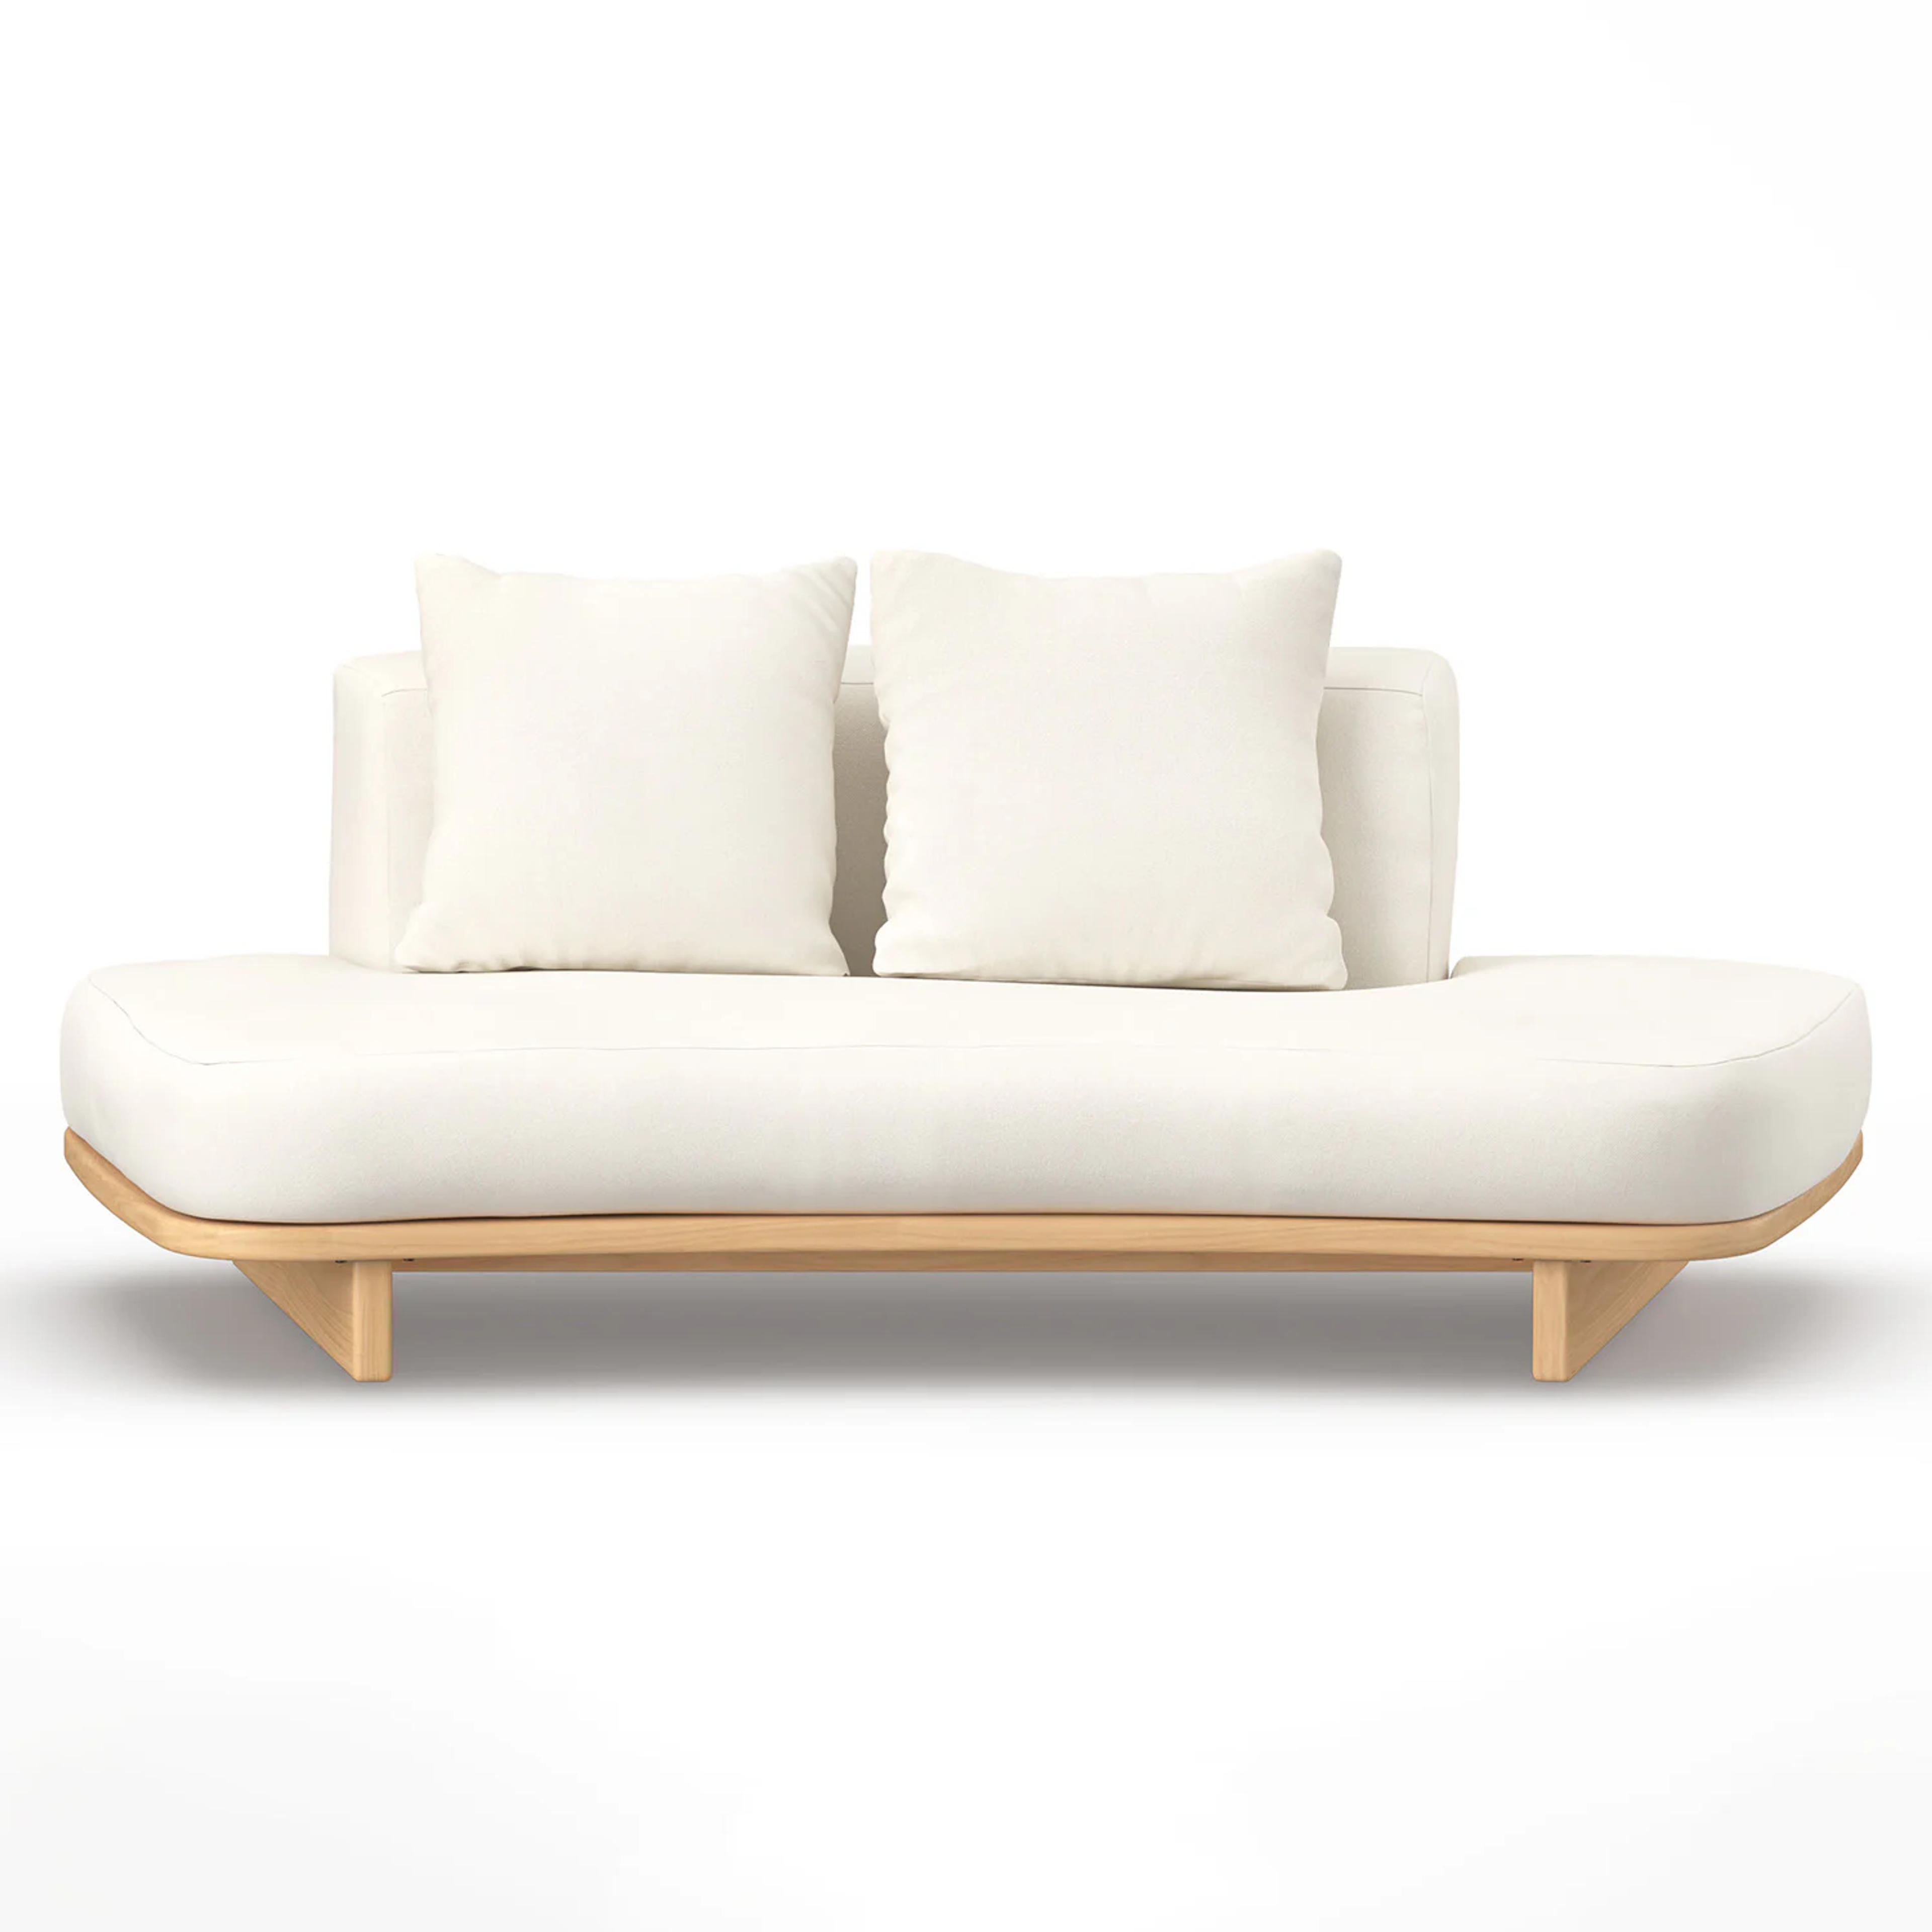 Daphne Dravite Ivory Solid Wood Outdoor Sofa | Article